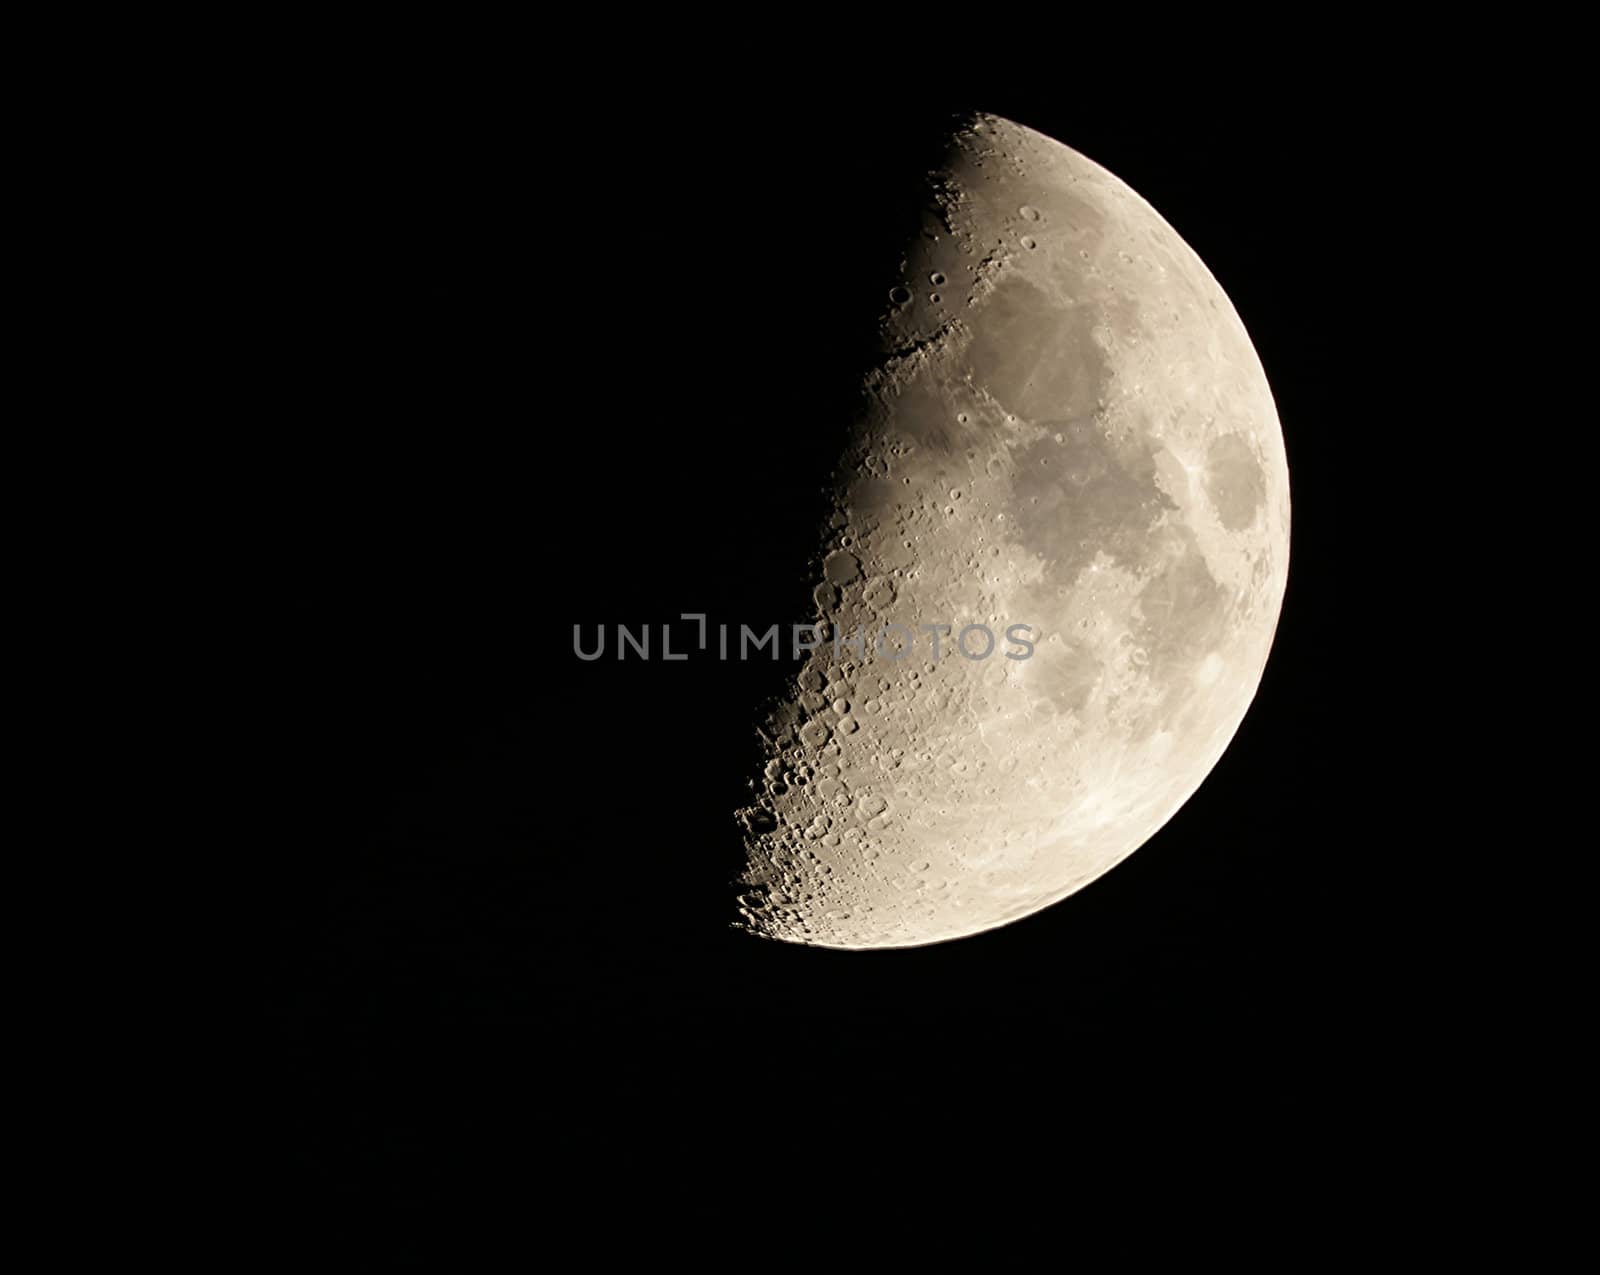 This is an image of a waxing moon as seen through a 8 inch Schmidt and Casgrain telescope.       